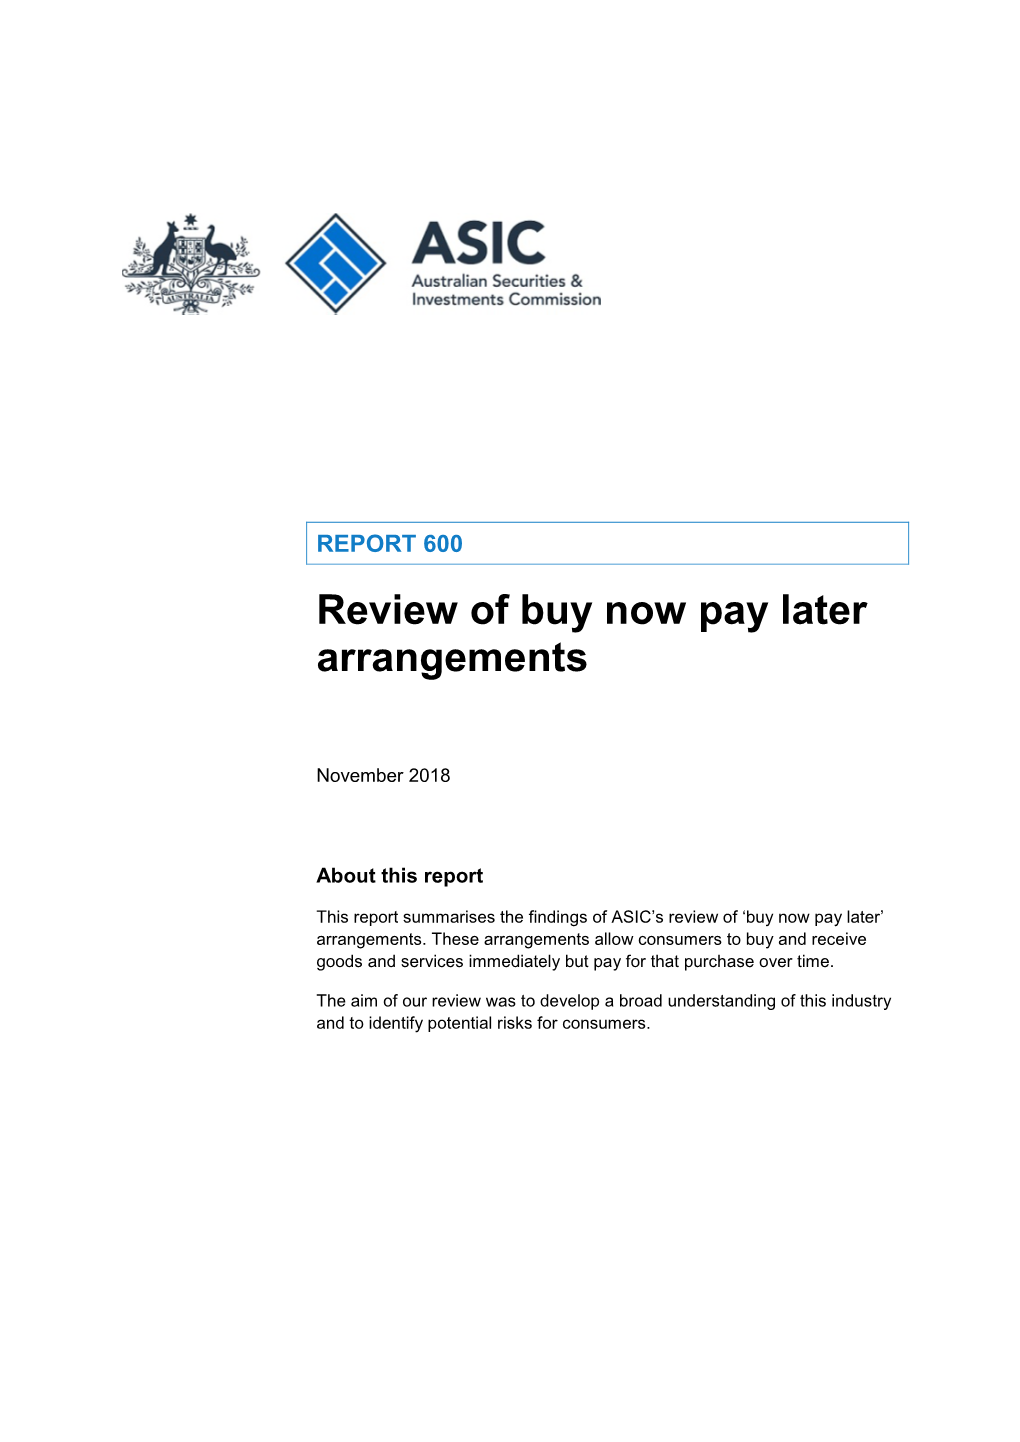 REPORT 600: Review of Buy Now Pay Later Arrangements